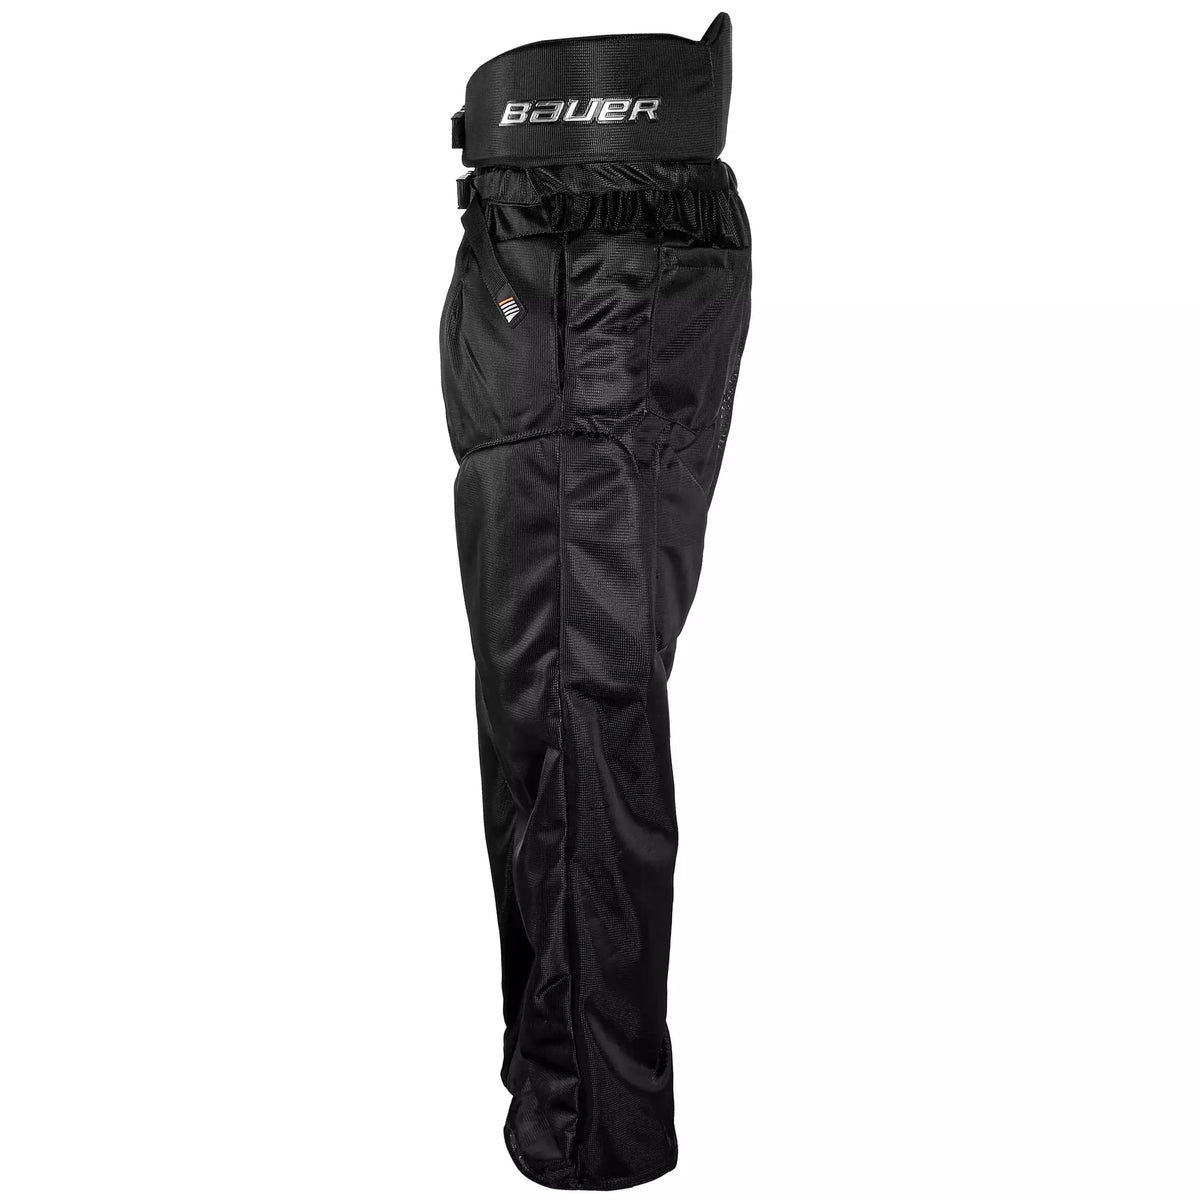 Bauer Official's Pant with Girdle